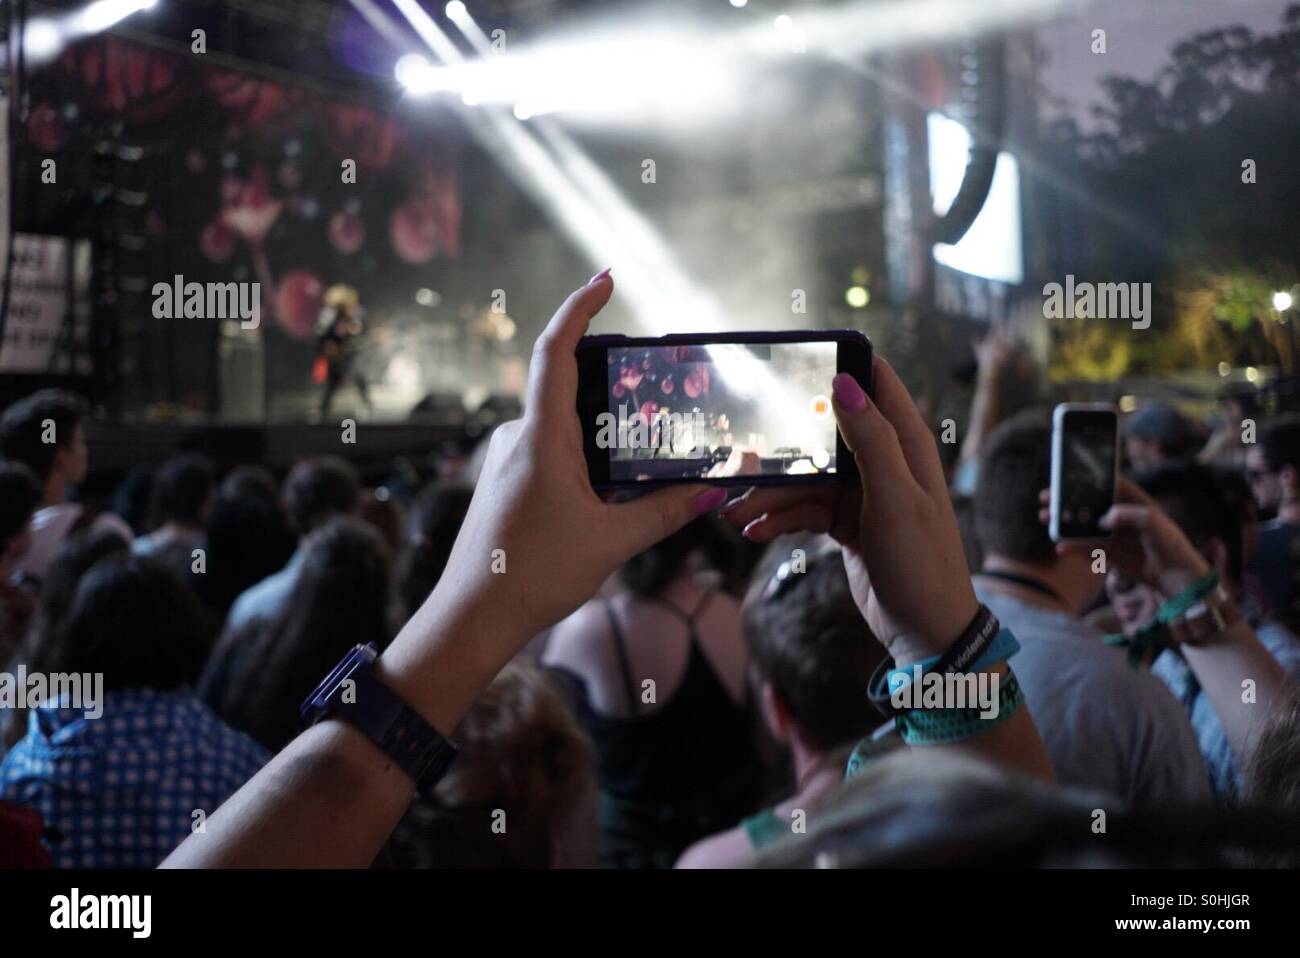 A smartphone being used to video at a music festival Stock Photo